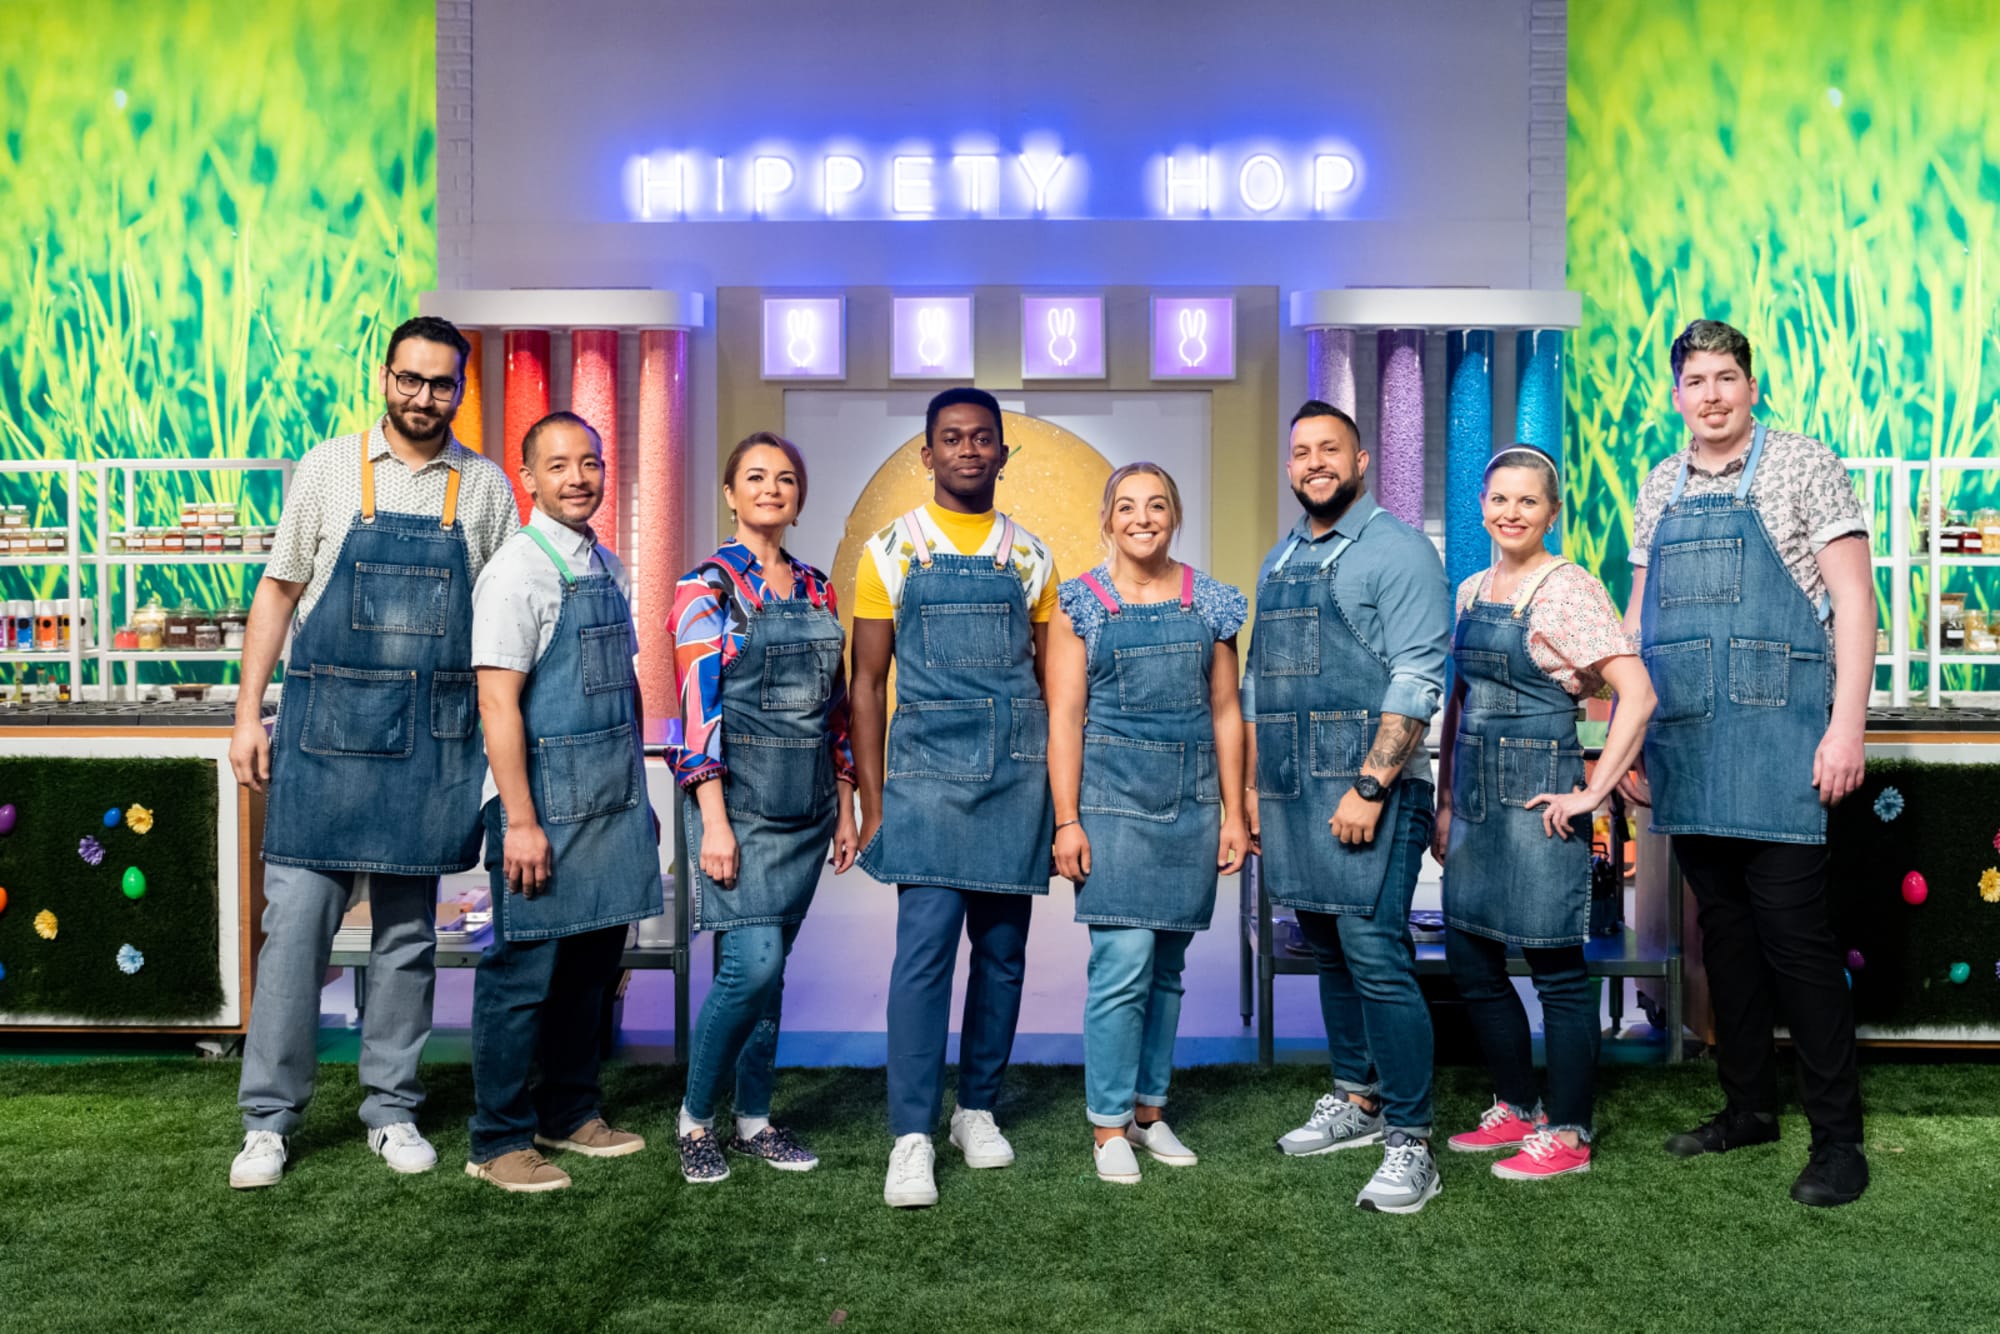 Spring Baking Championship Easter gets cracking in the premiere